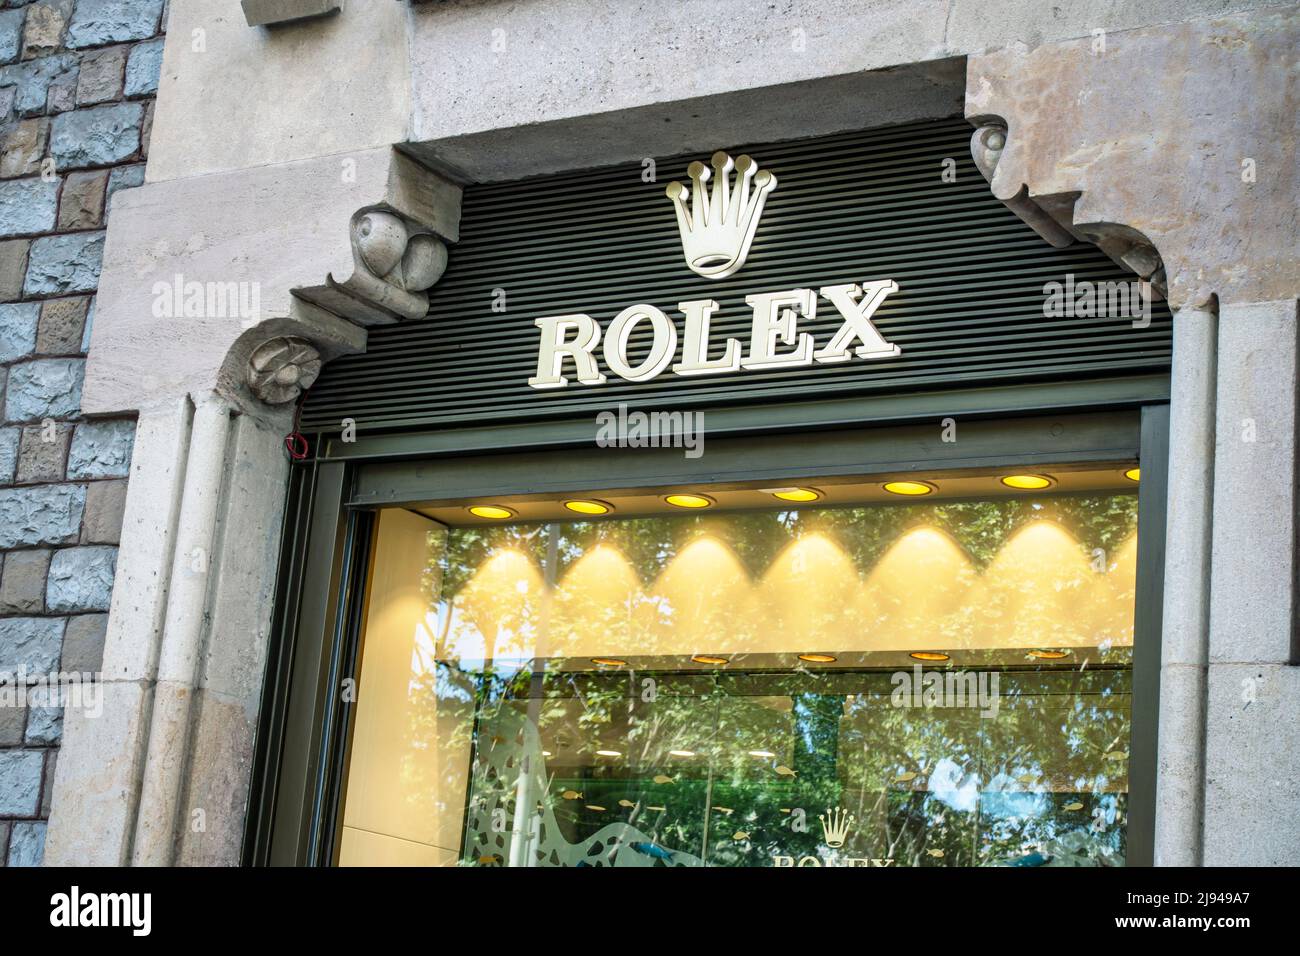 Barcelona, Spain - May 9, 2022: Rolex store sign. Rolex is a British-founded Swiss watch designer and manufacturer based in Geneva, Switzerland.. Stock Photo